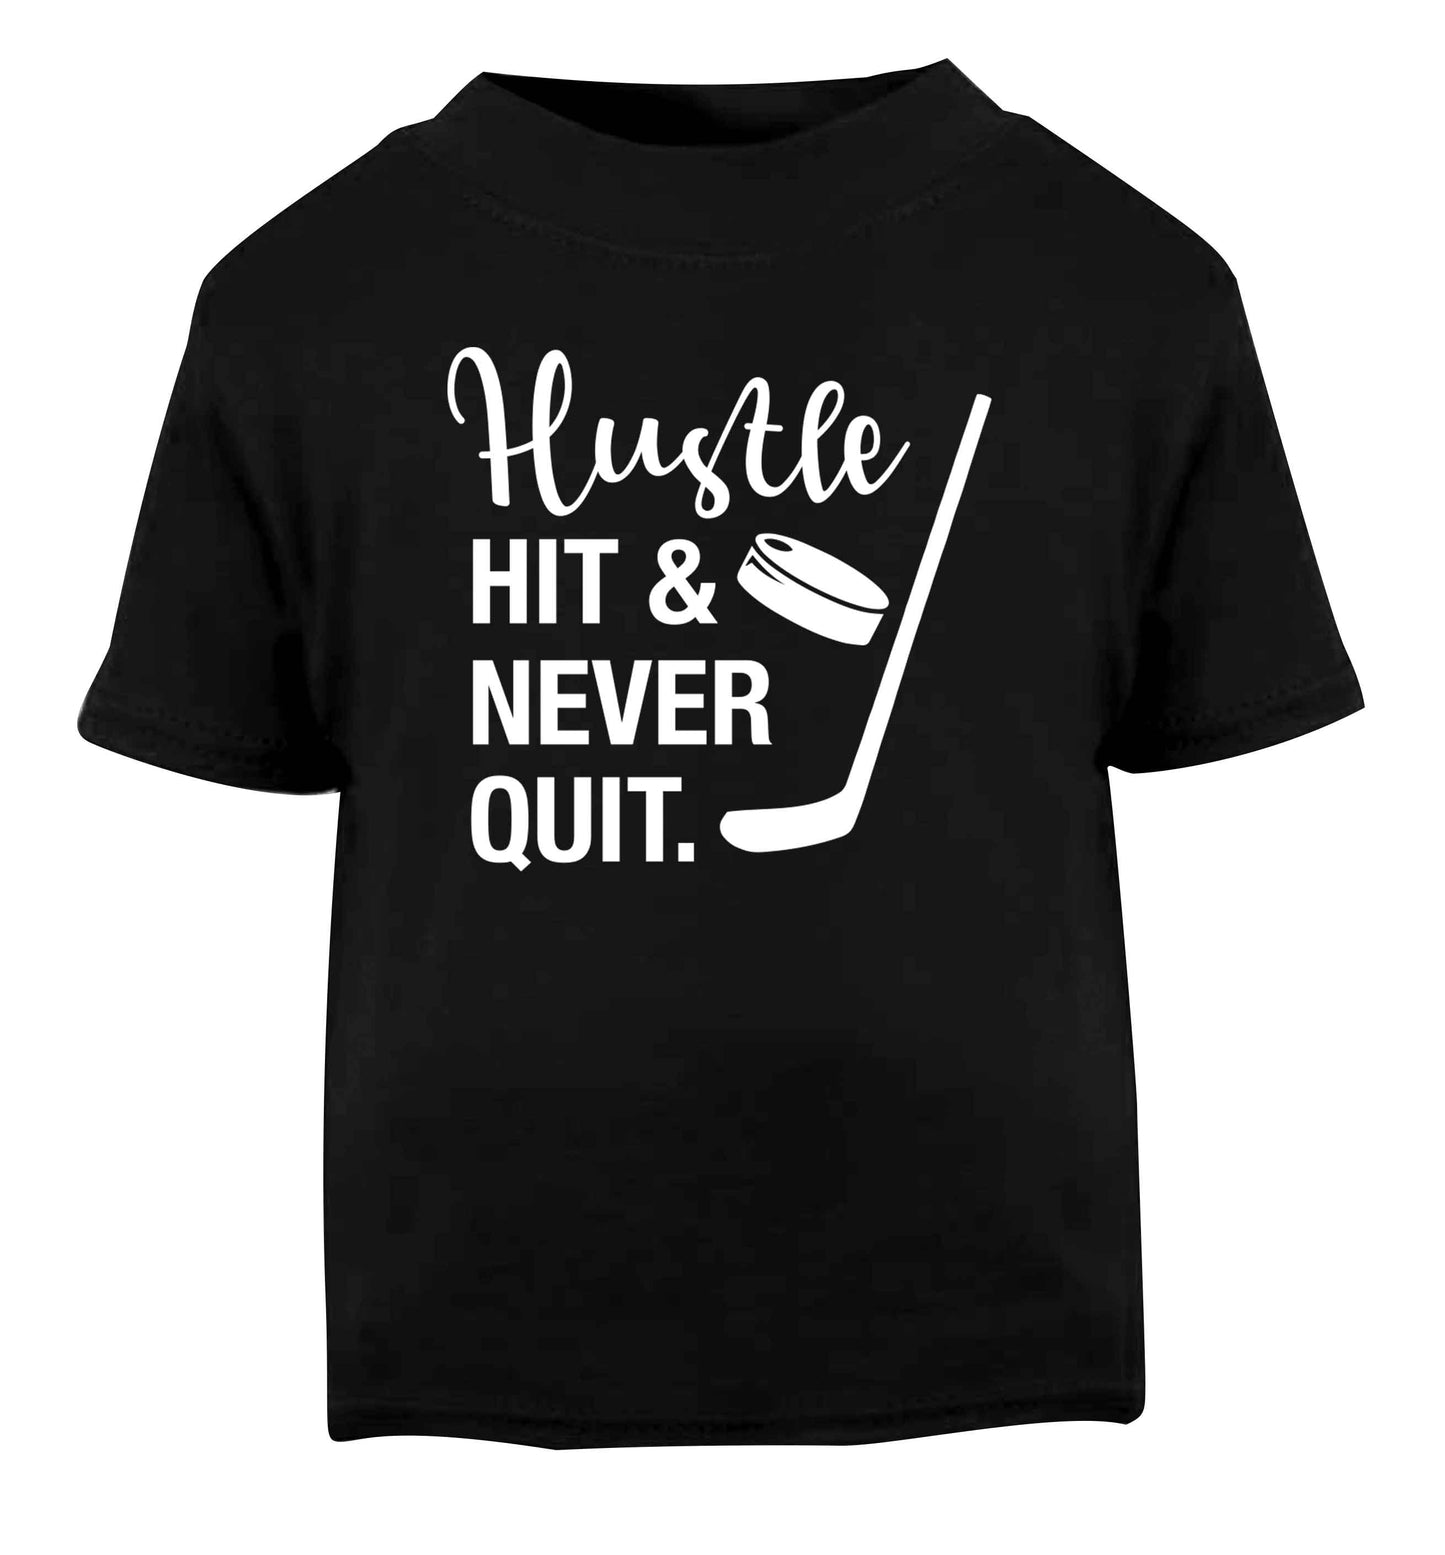 Hustle hit and never quit Black Baby Toddler Tshirt 2 years